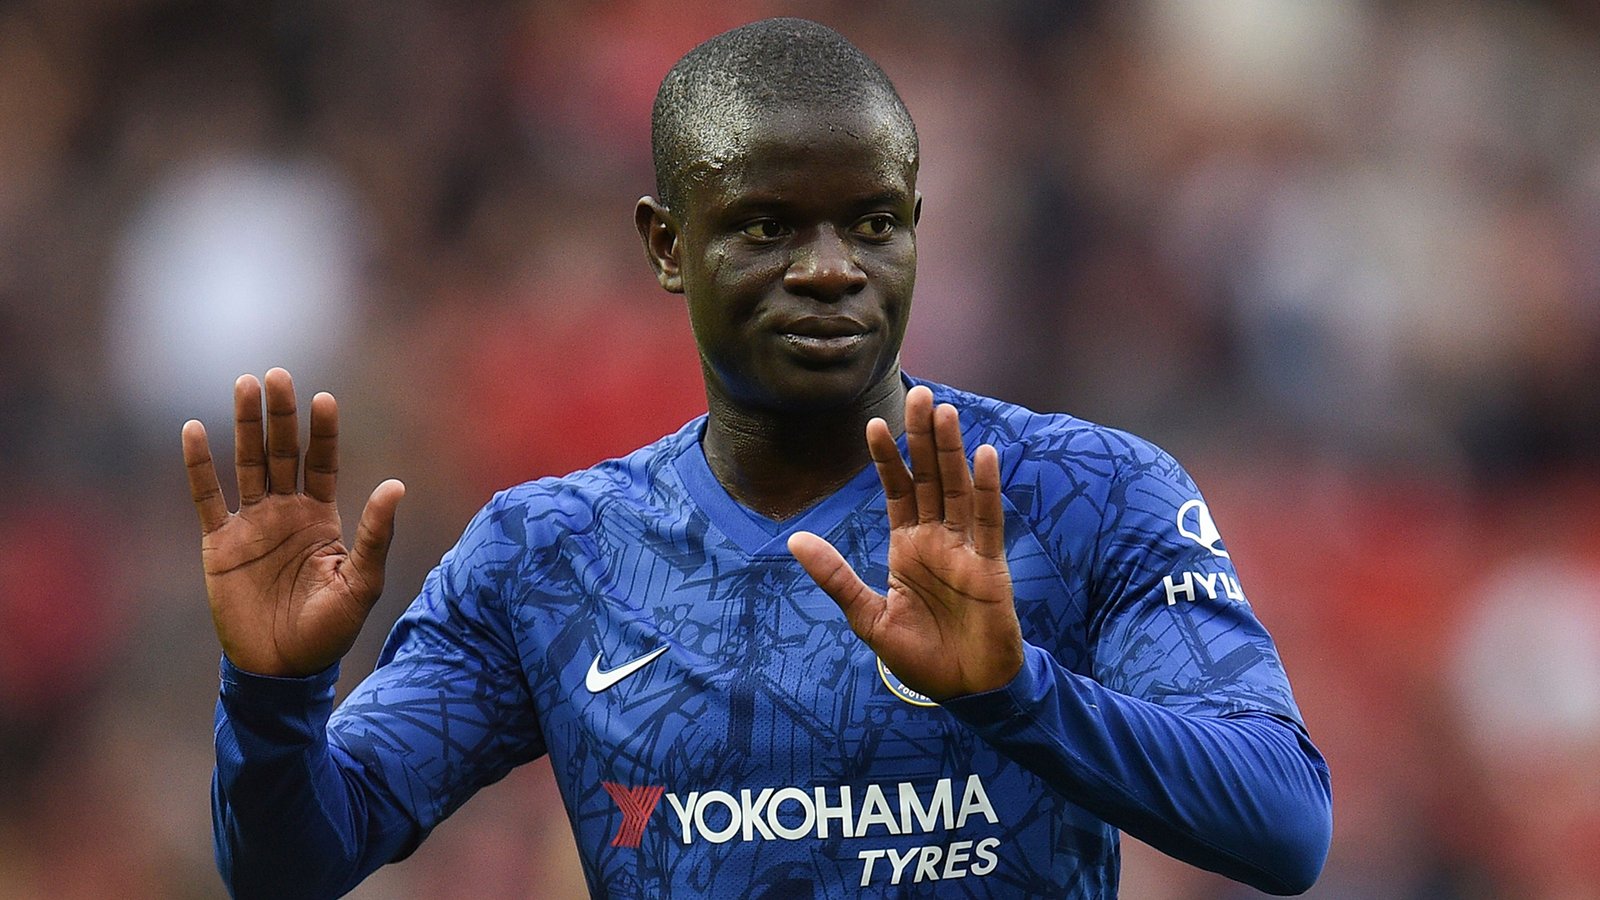  N'Golo Kante, a midfielder for Chelsea, is pictured in action during a match at Old Trafford stadium.